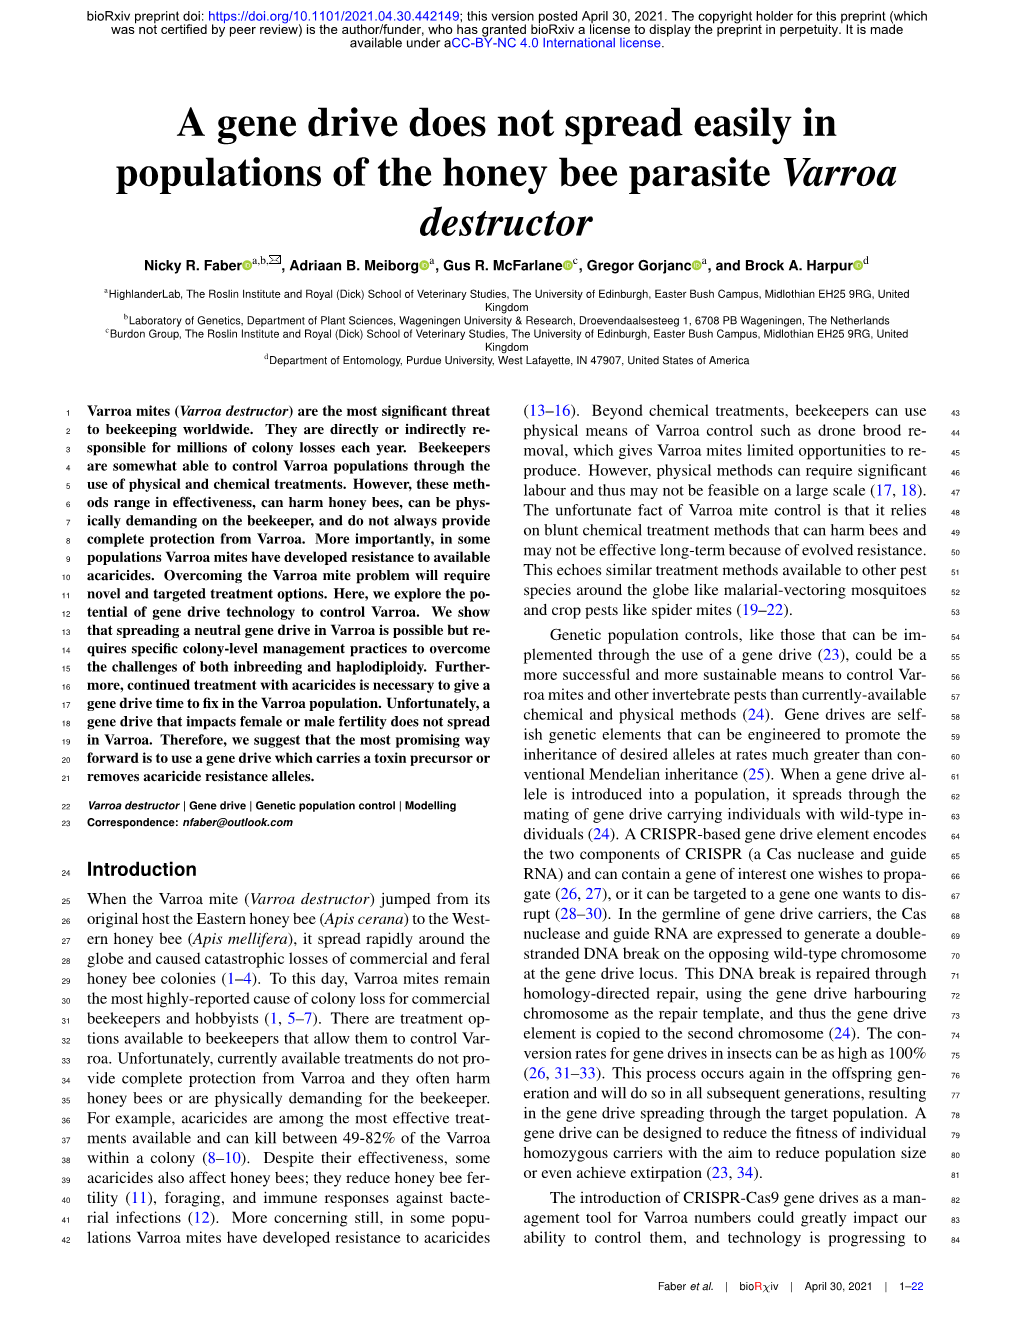 A Gene Drive Does Not Spread Easily in Populations of the Honey Bee Parasite Varroa Destructor